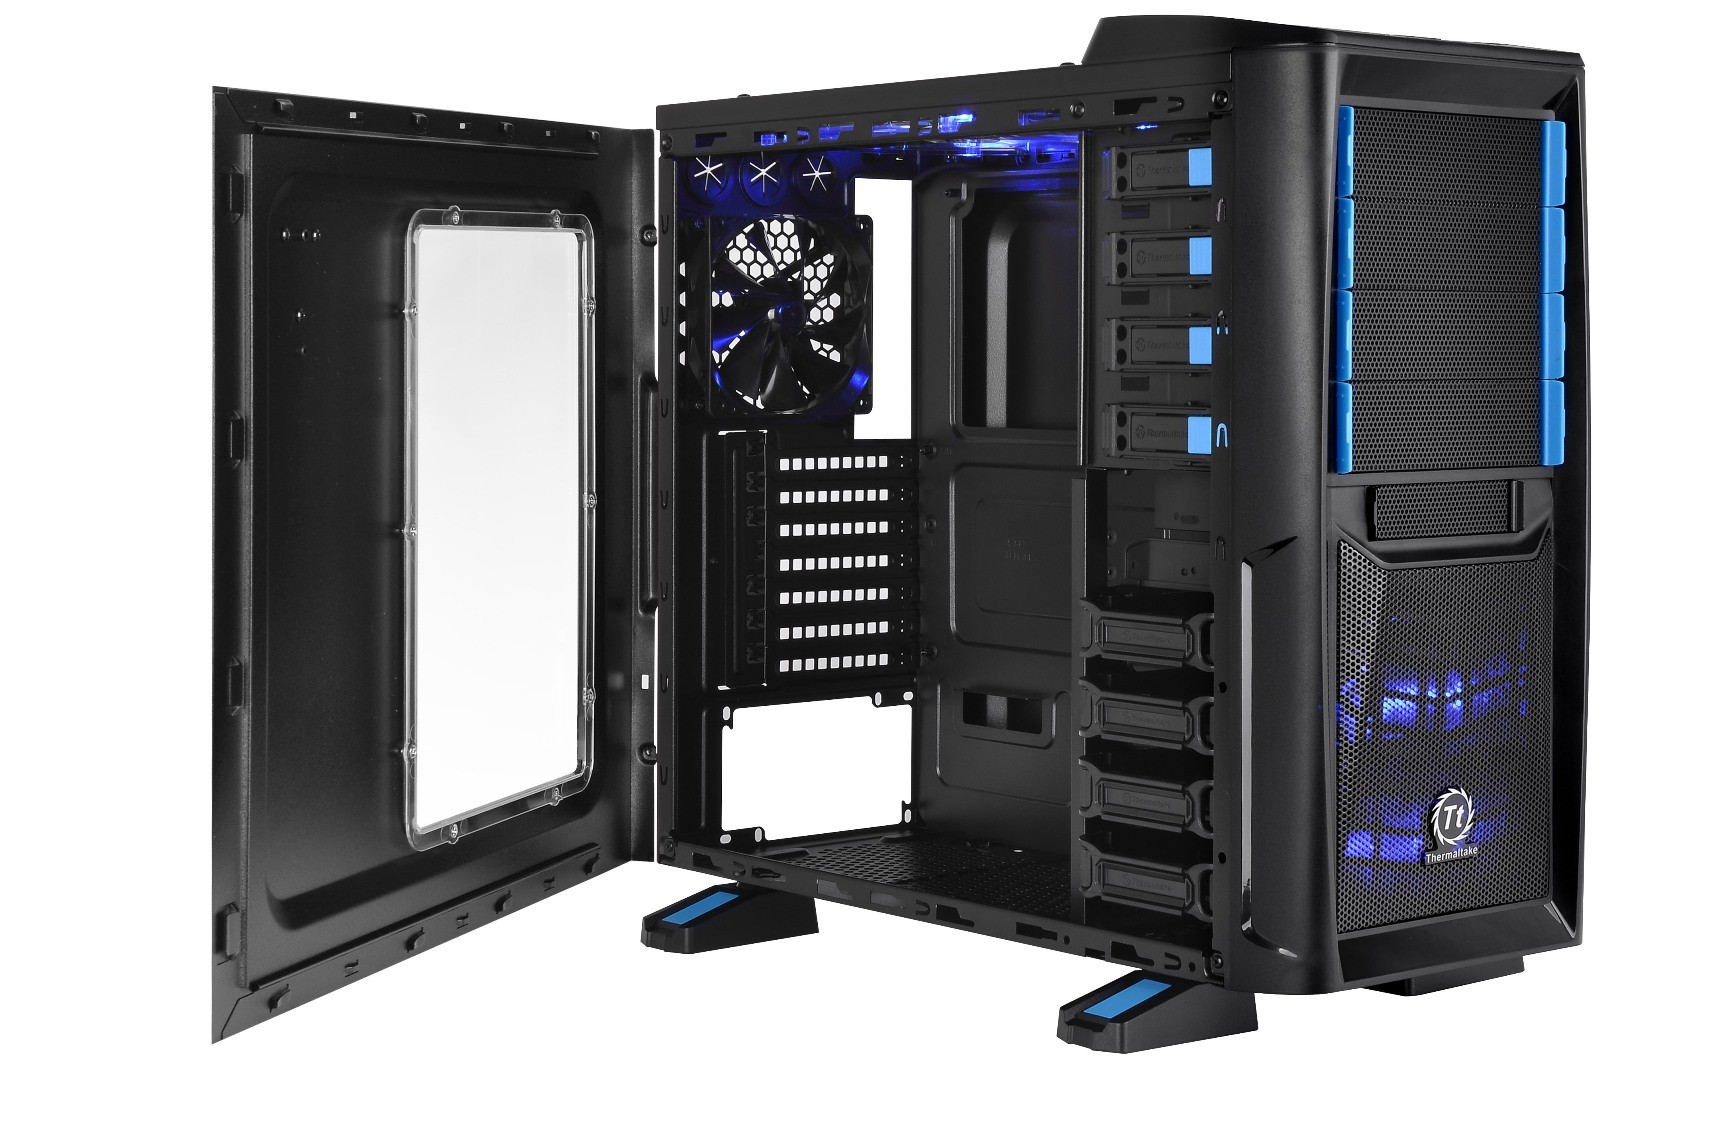 Media asset in full size related to 3dfxzone.it news item entitled as follows: Thermaltake annuncia il case gaming-oriented Chaser A41 | Image Name: news19016_Thermaltake-Chaser-A41_case_1.jpg